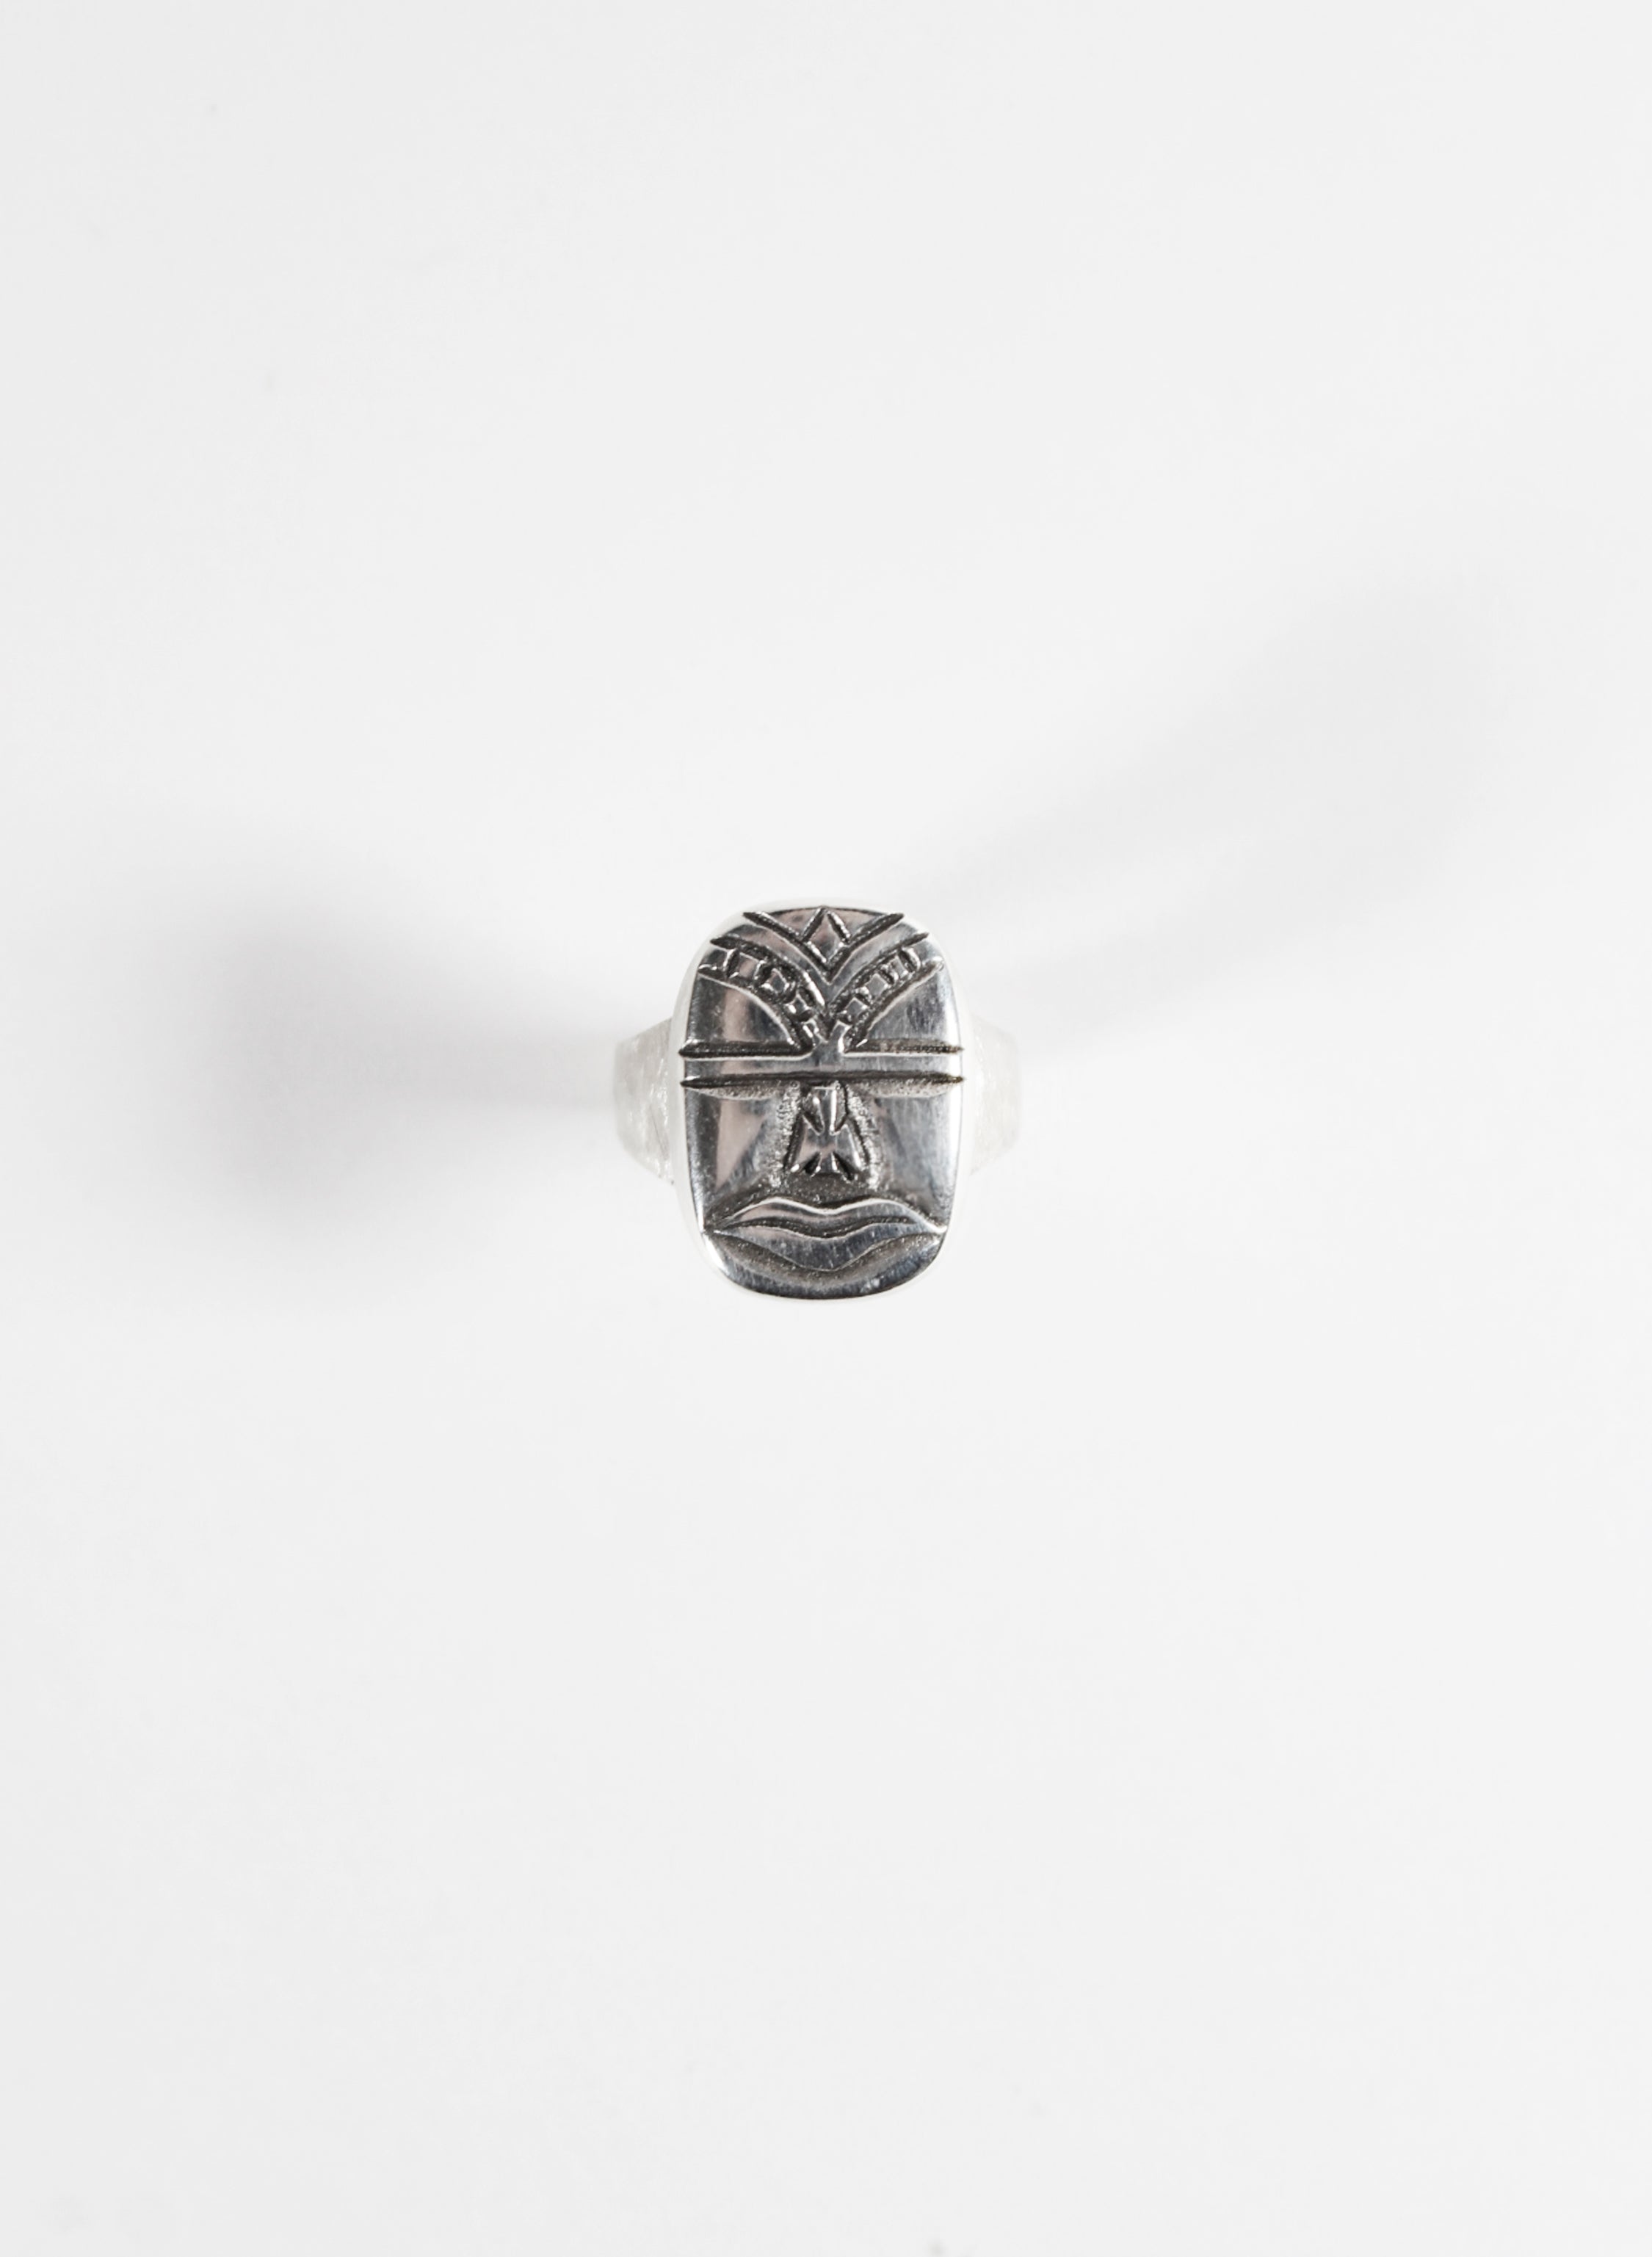 Mana Wāhine - Sterling Silver Ring